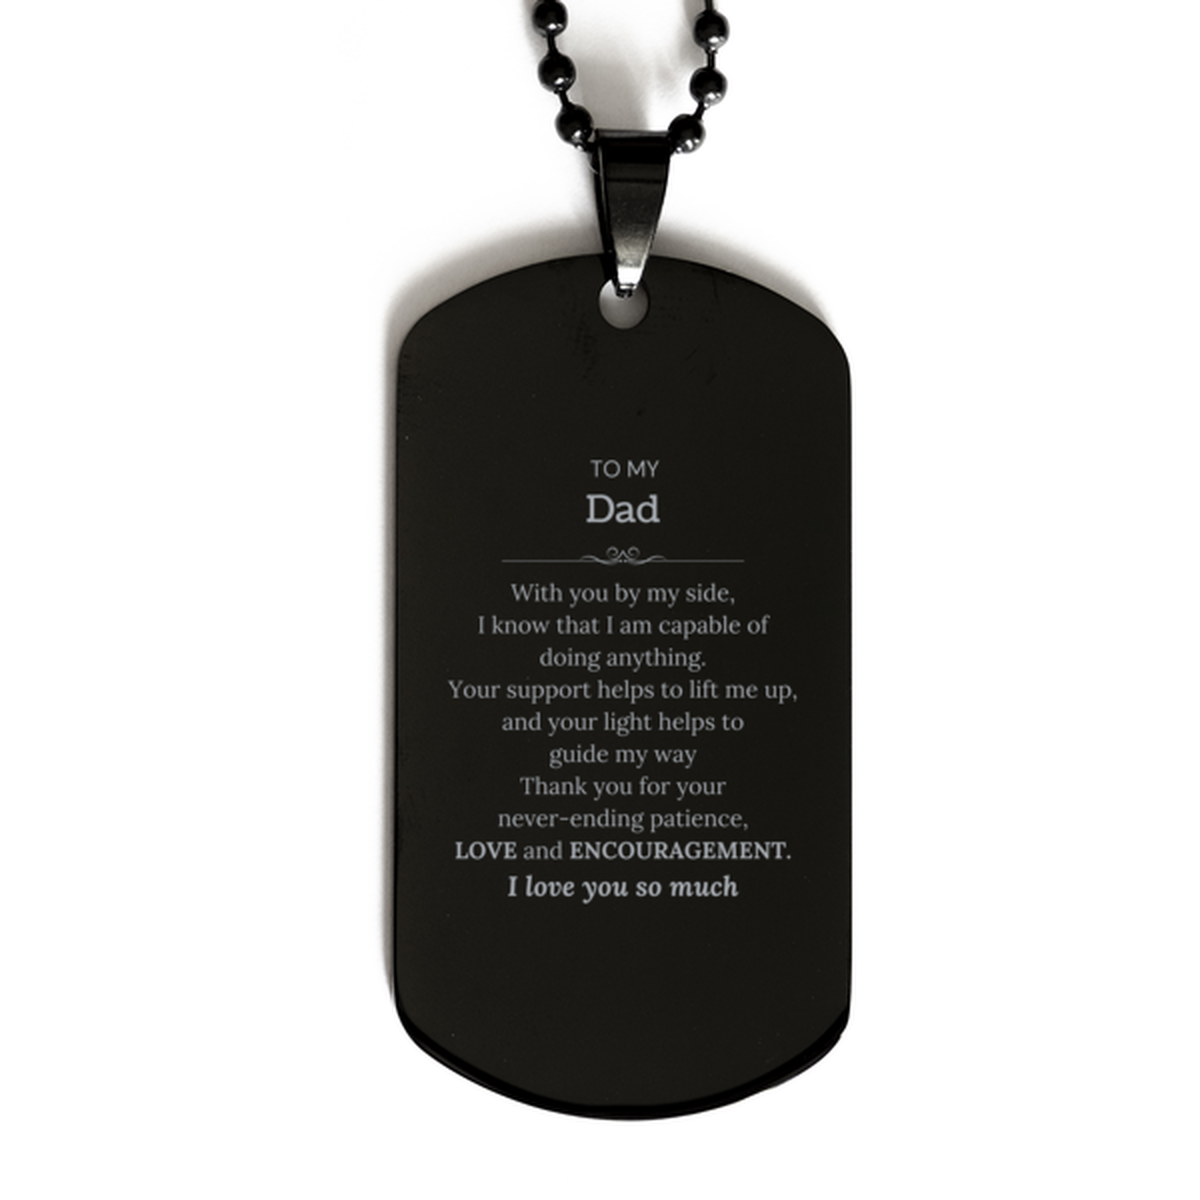 Appreciation Dad Black Dog Tag Gifts, To My Dad Birthday Christmas Wedding Keepsake Gifts for Dad With you by my side, I know that I am capable of doing anything. I love you so much